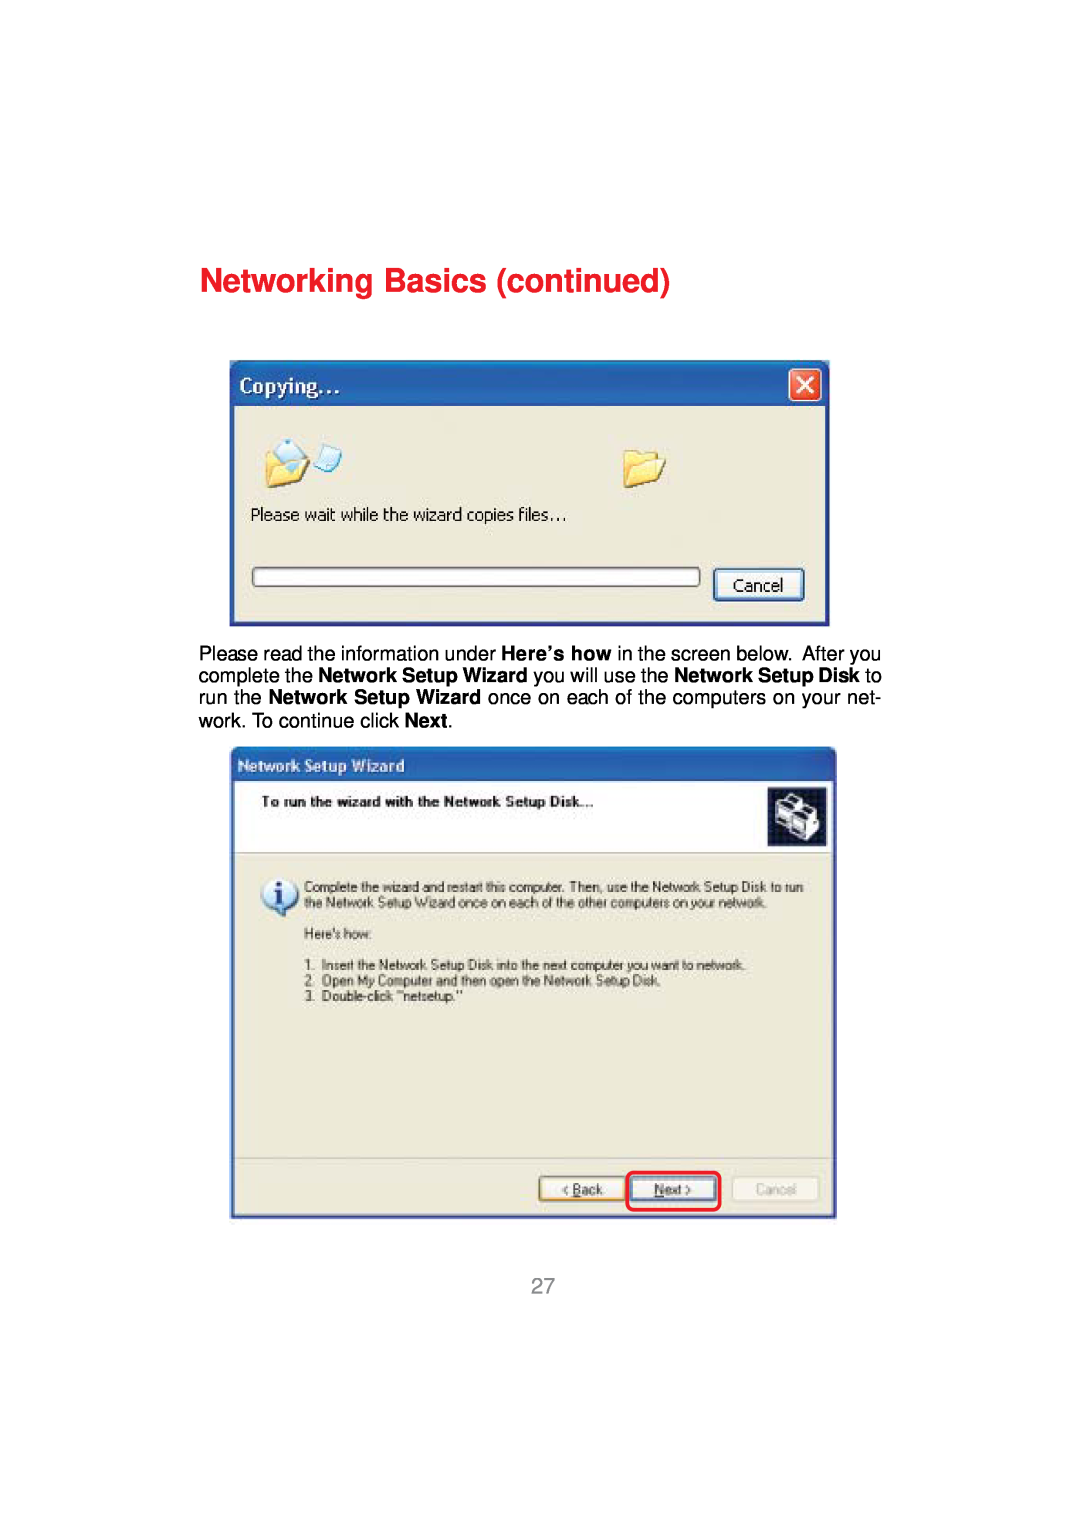 D-Link DWL-AG530 manual Networking Basics continued 